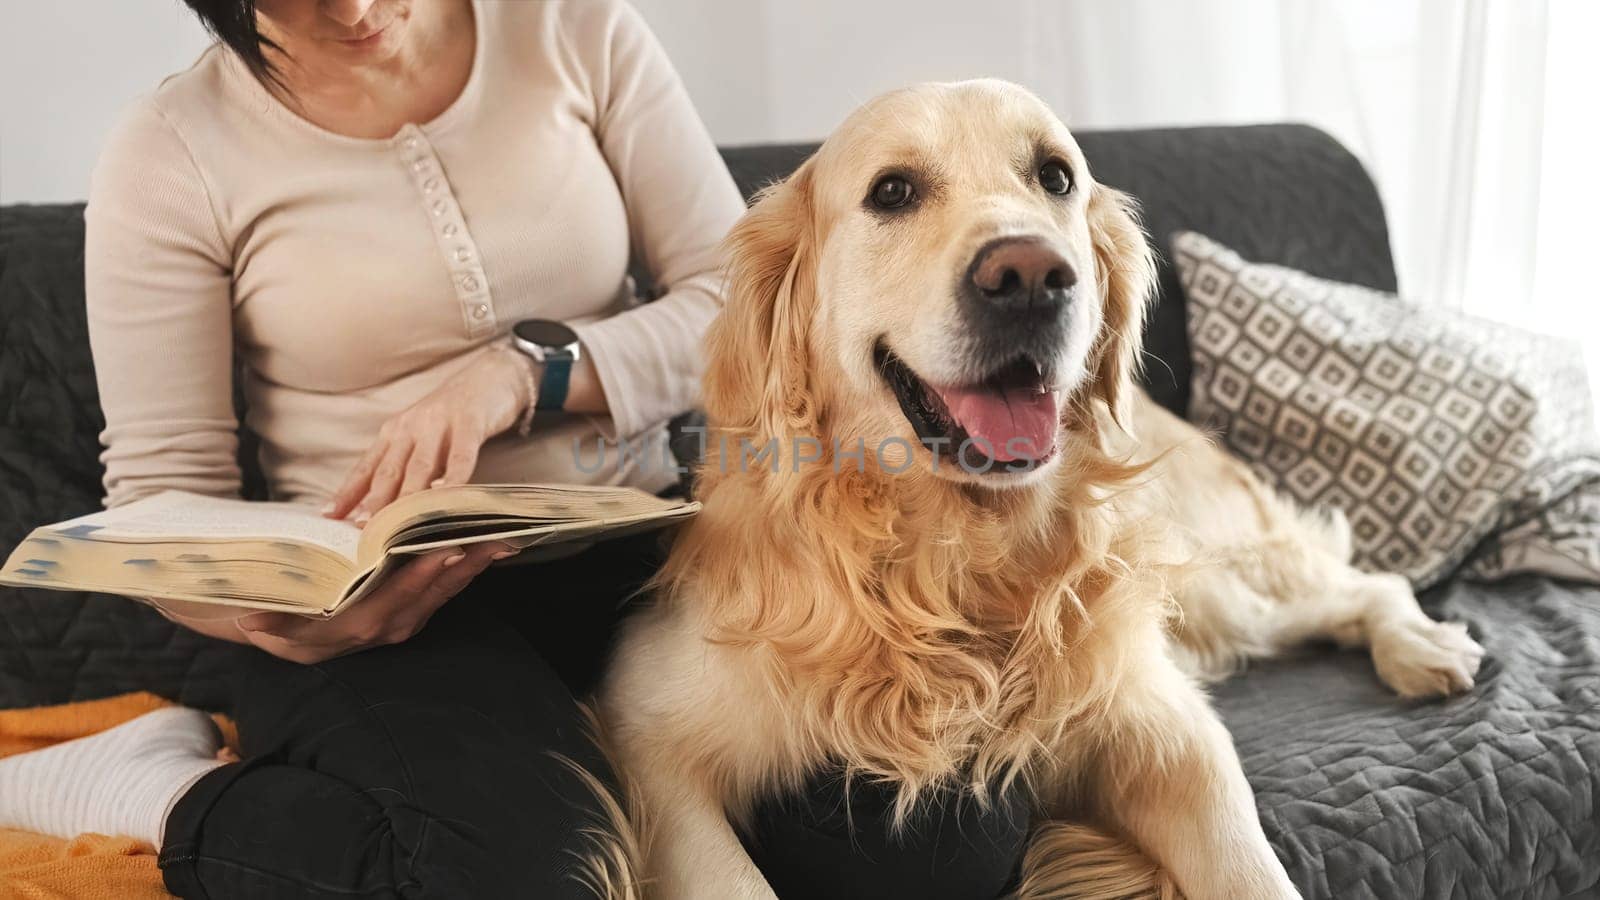 Pretty girl with golden retriever dog reading book sitting on sofa at home. Young woman and purebred pet doggy labrador with literature studying